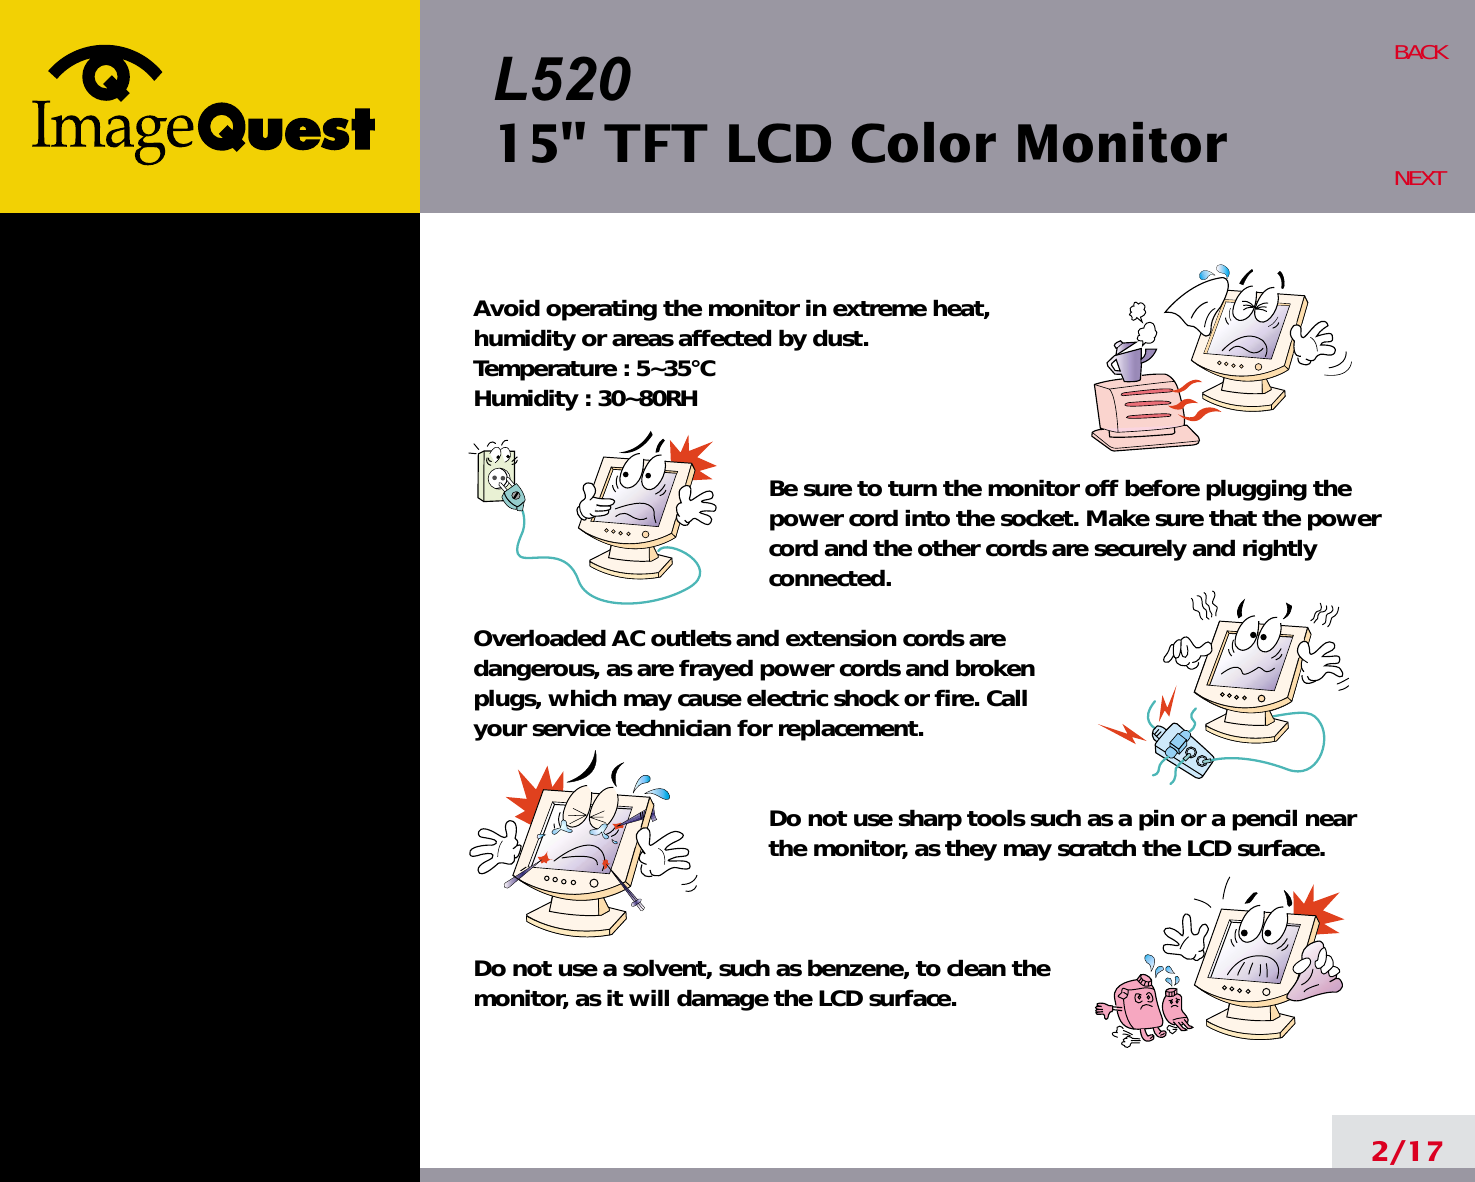 L52015&quot; TFT LCD Color Monitor2/17BACKNEXTAvoid operating the monitor in extreme heat, humidity or areas affected by dust. Temperature : 5~35°CHumidity : 30~80RH Be sure to turn the monitor off before plugging thepower cord into the socket. Make sure that the powercord and the other cords are securely and rightlyconnected.Overloaded AC outlets and extension cords are dangerous, as are frayed power cords and broken plugs, which may cause electric shock or fire. Call your service technician for replacement.Do not use sharp tools such as a pin or a pencil near the monitor, as they may scratch the LCD surface.Do not use a solvent, such as benzene, to clean the monitor, as it will damage the LCD surface.